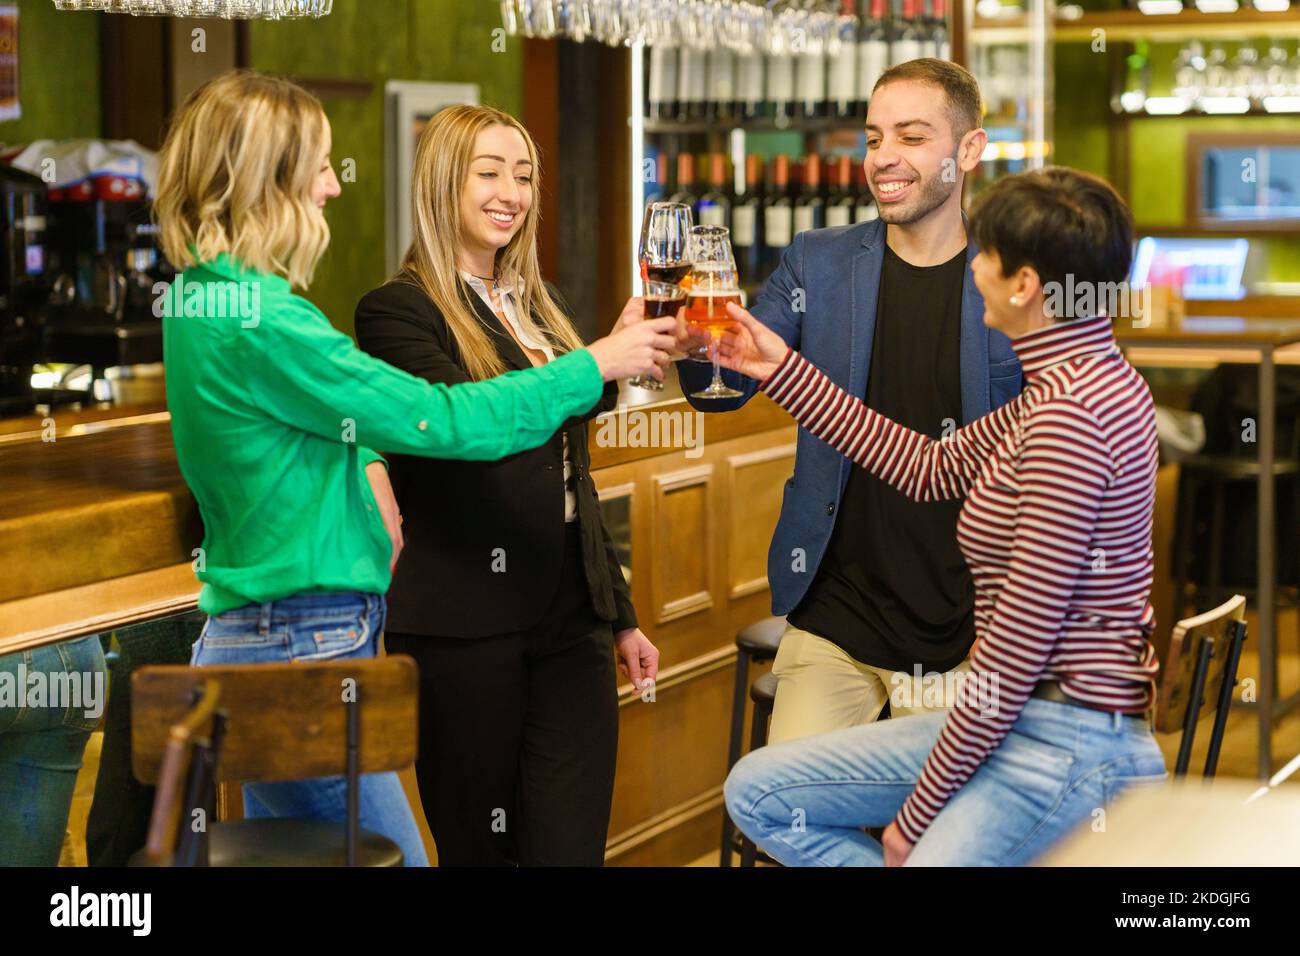 Cheerful men and women toasting at a bar counter Stock Photo